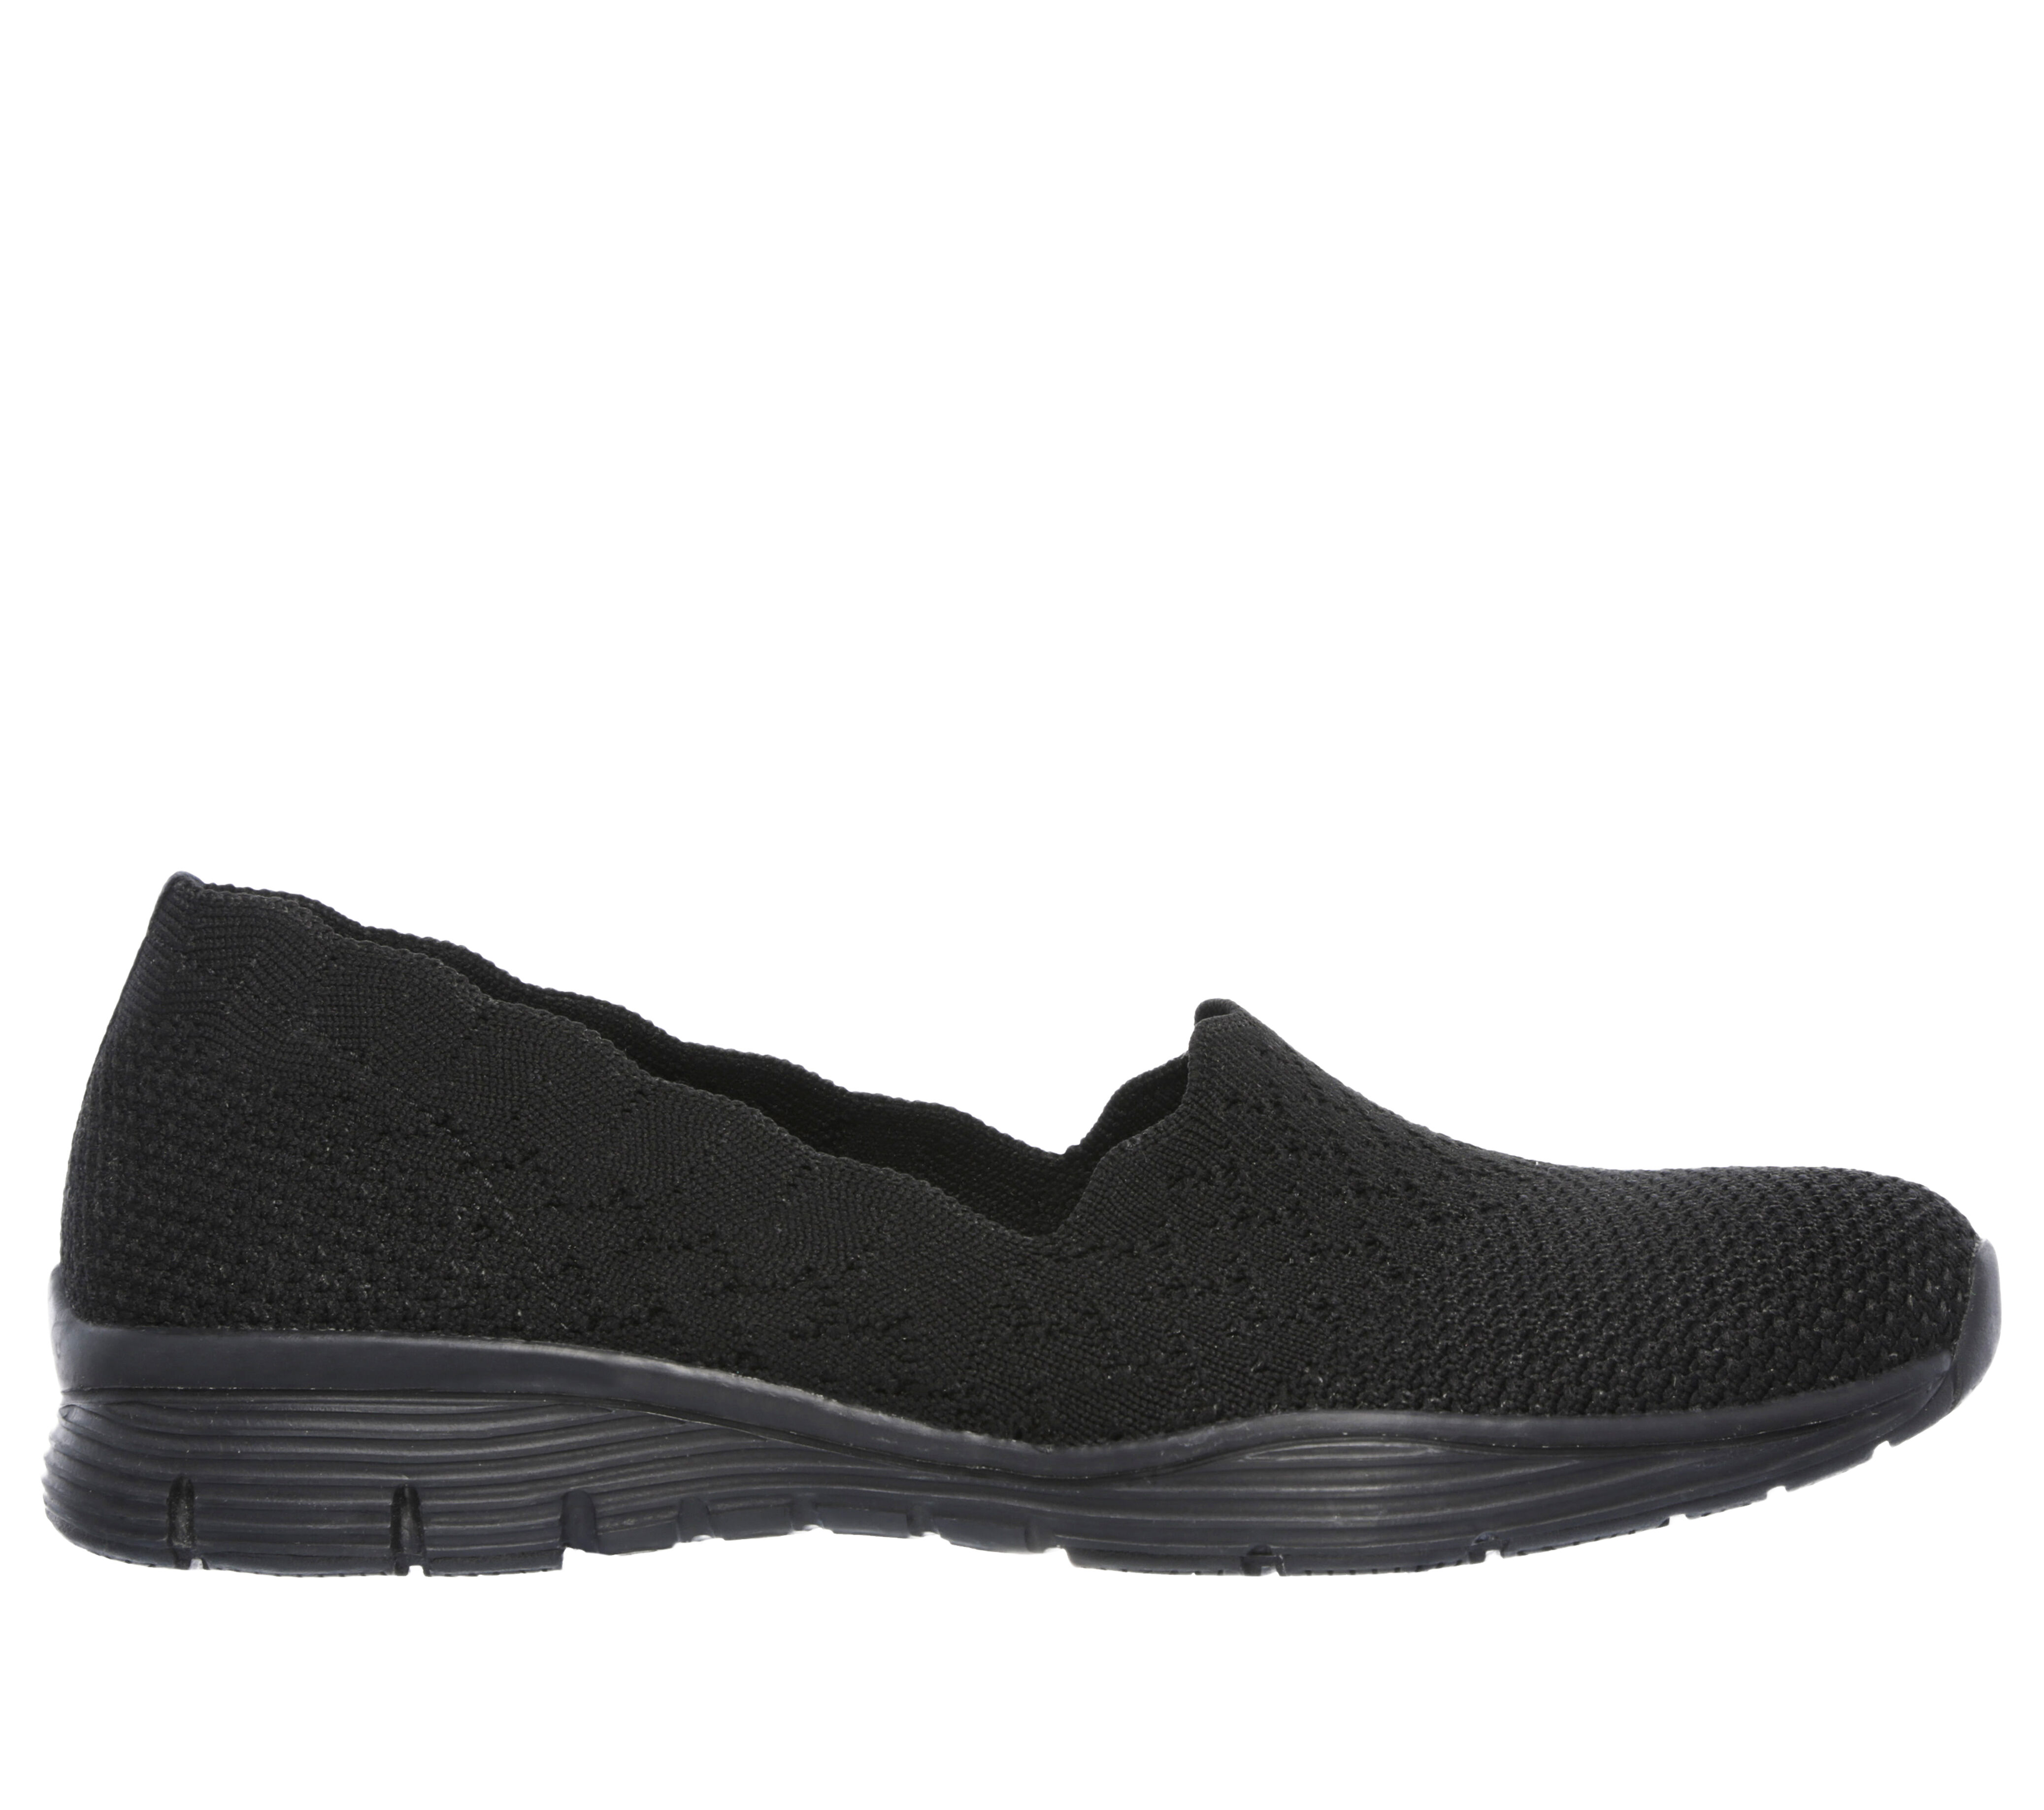 skechers seager stat wide